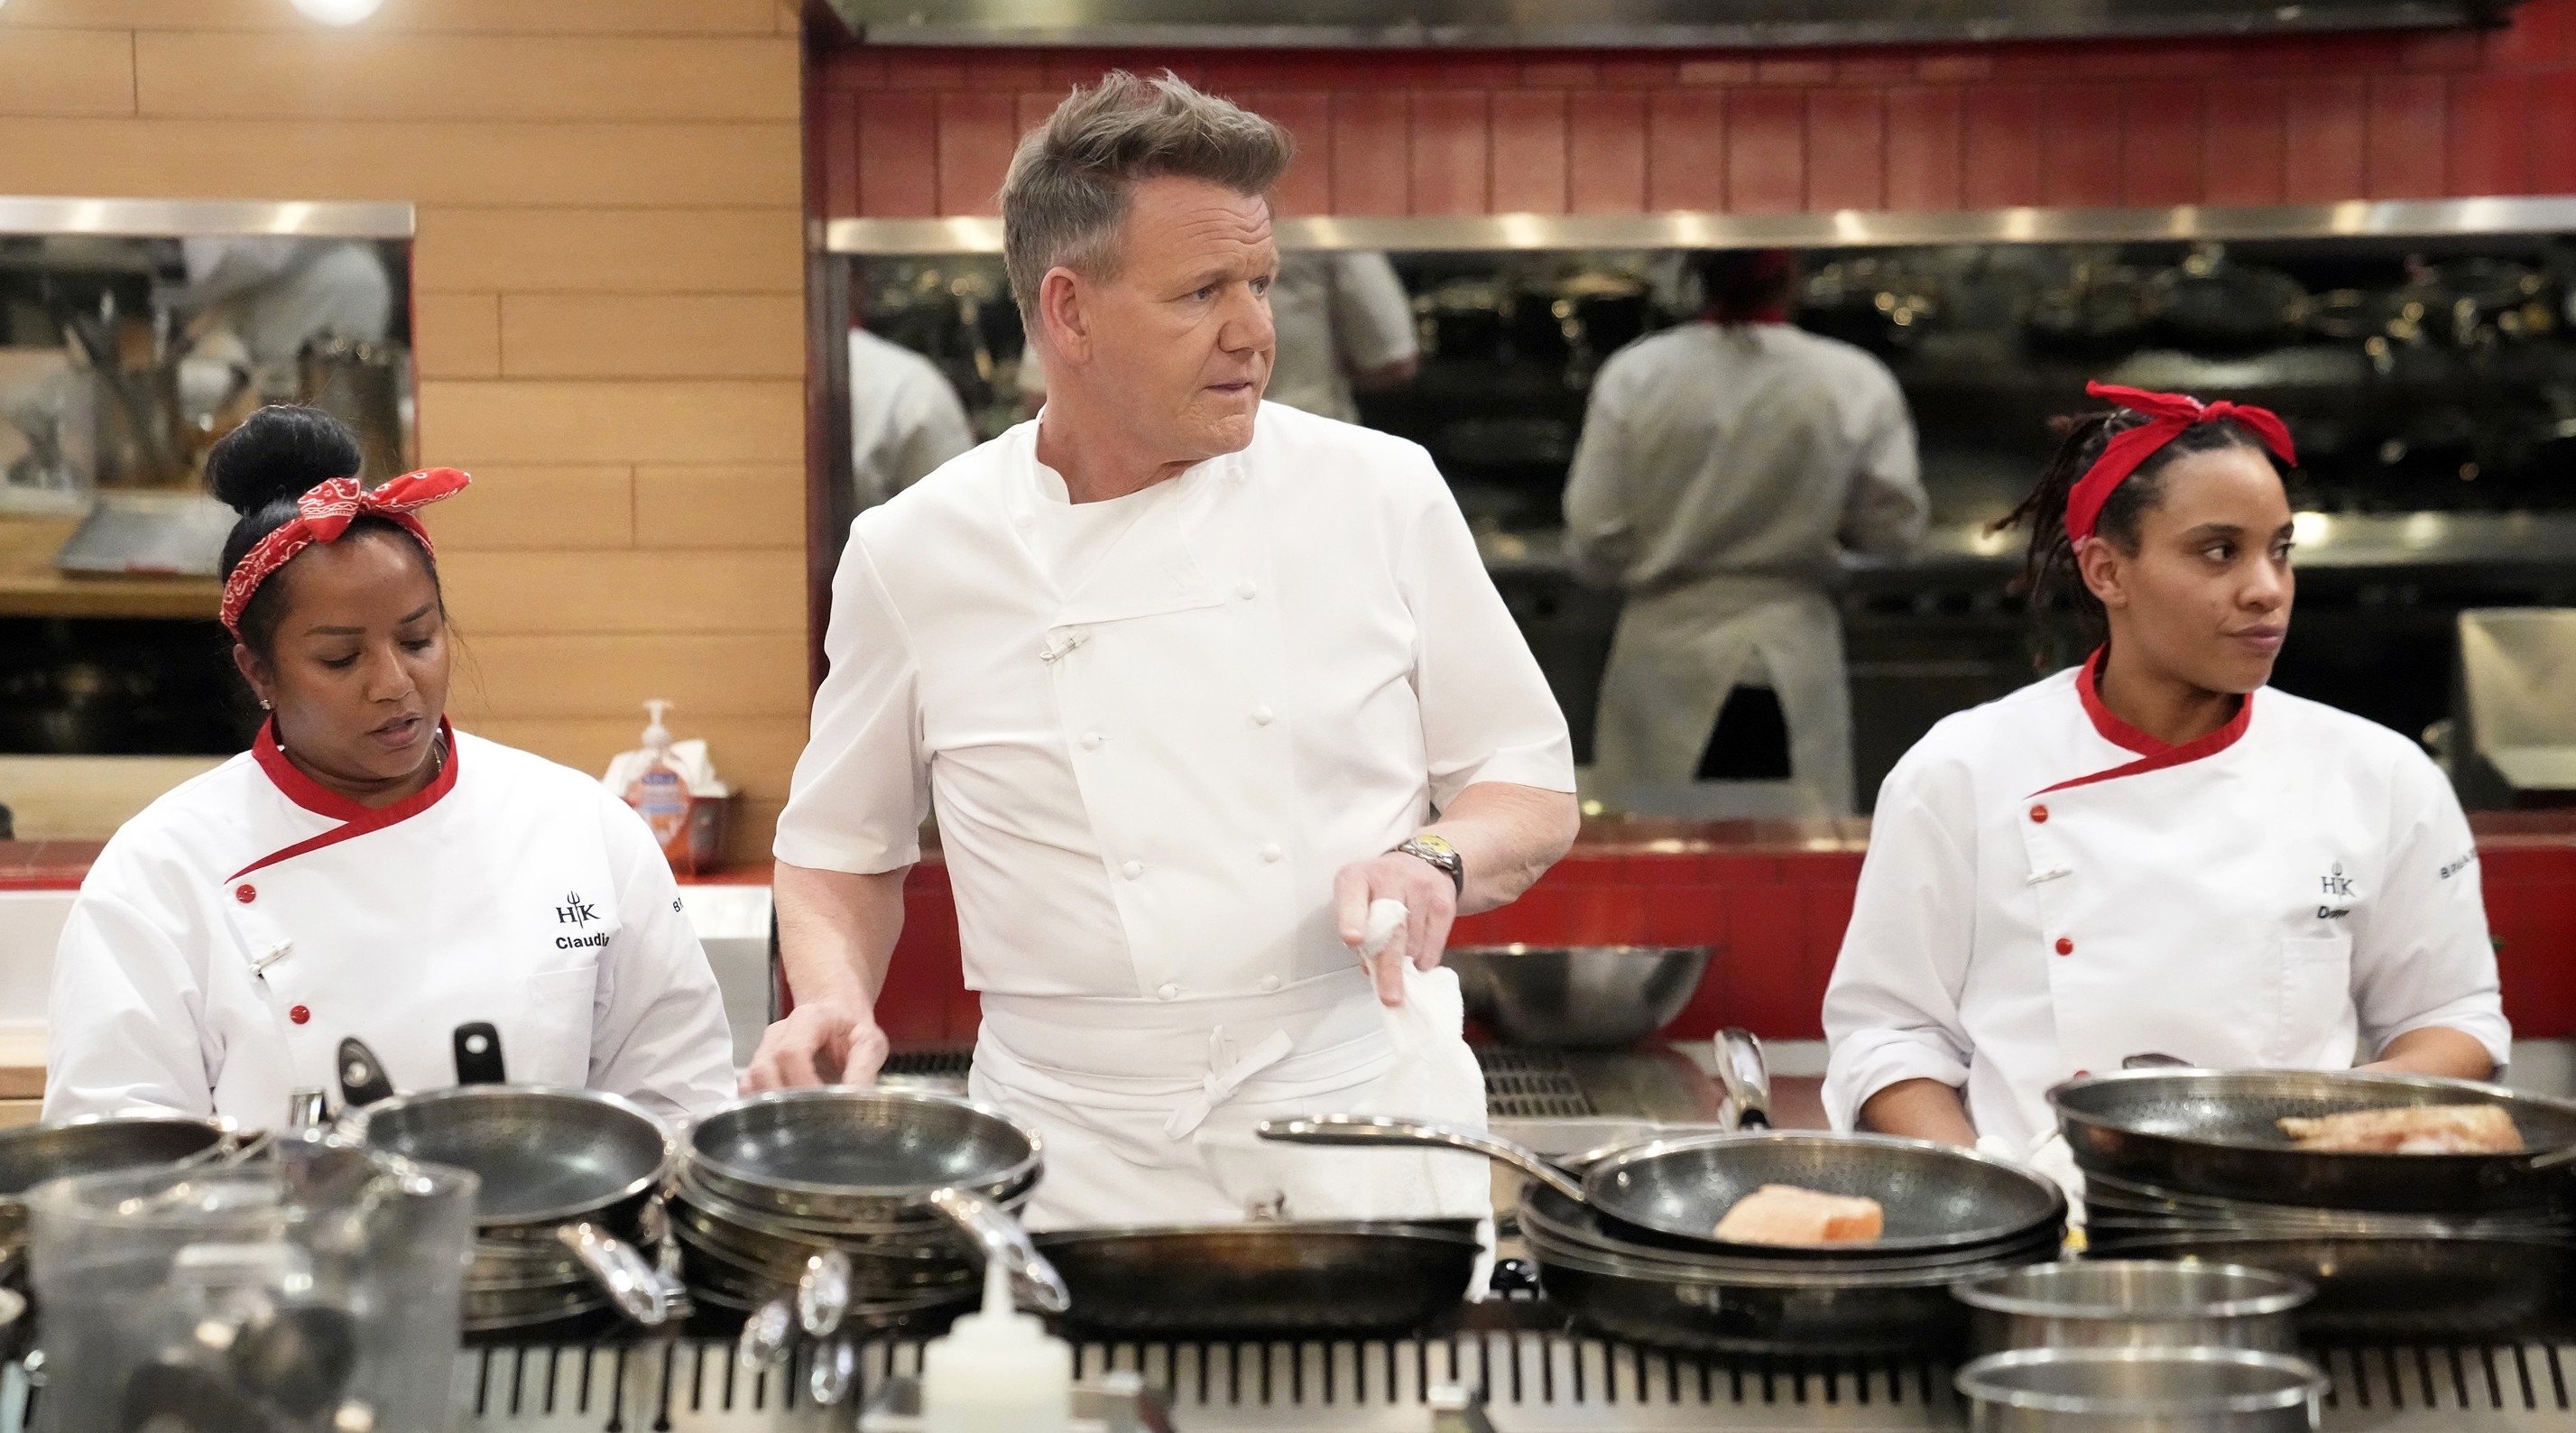 Gordon Ramsay with two chefs in a kitchen, overseeing cooking activities